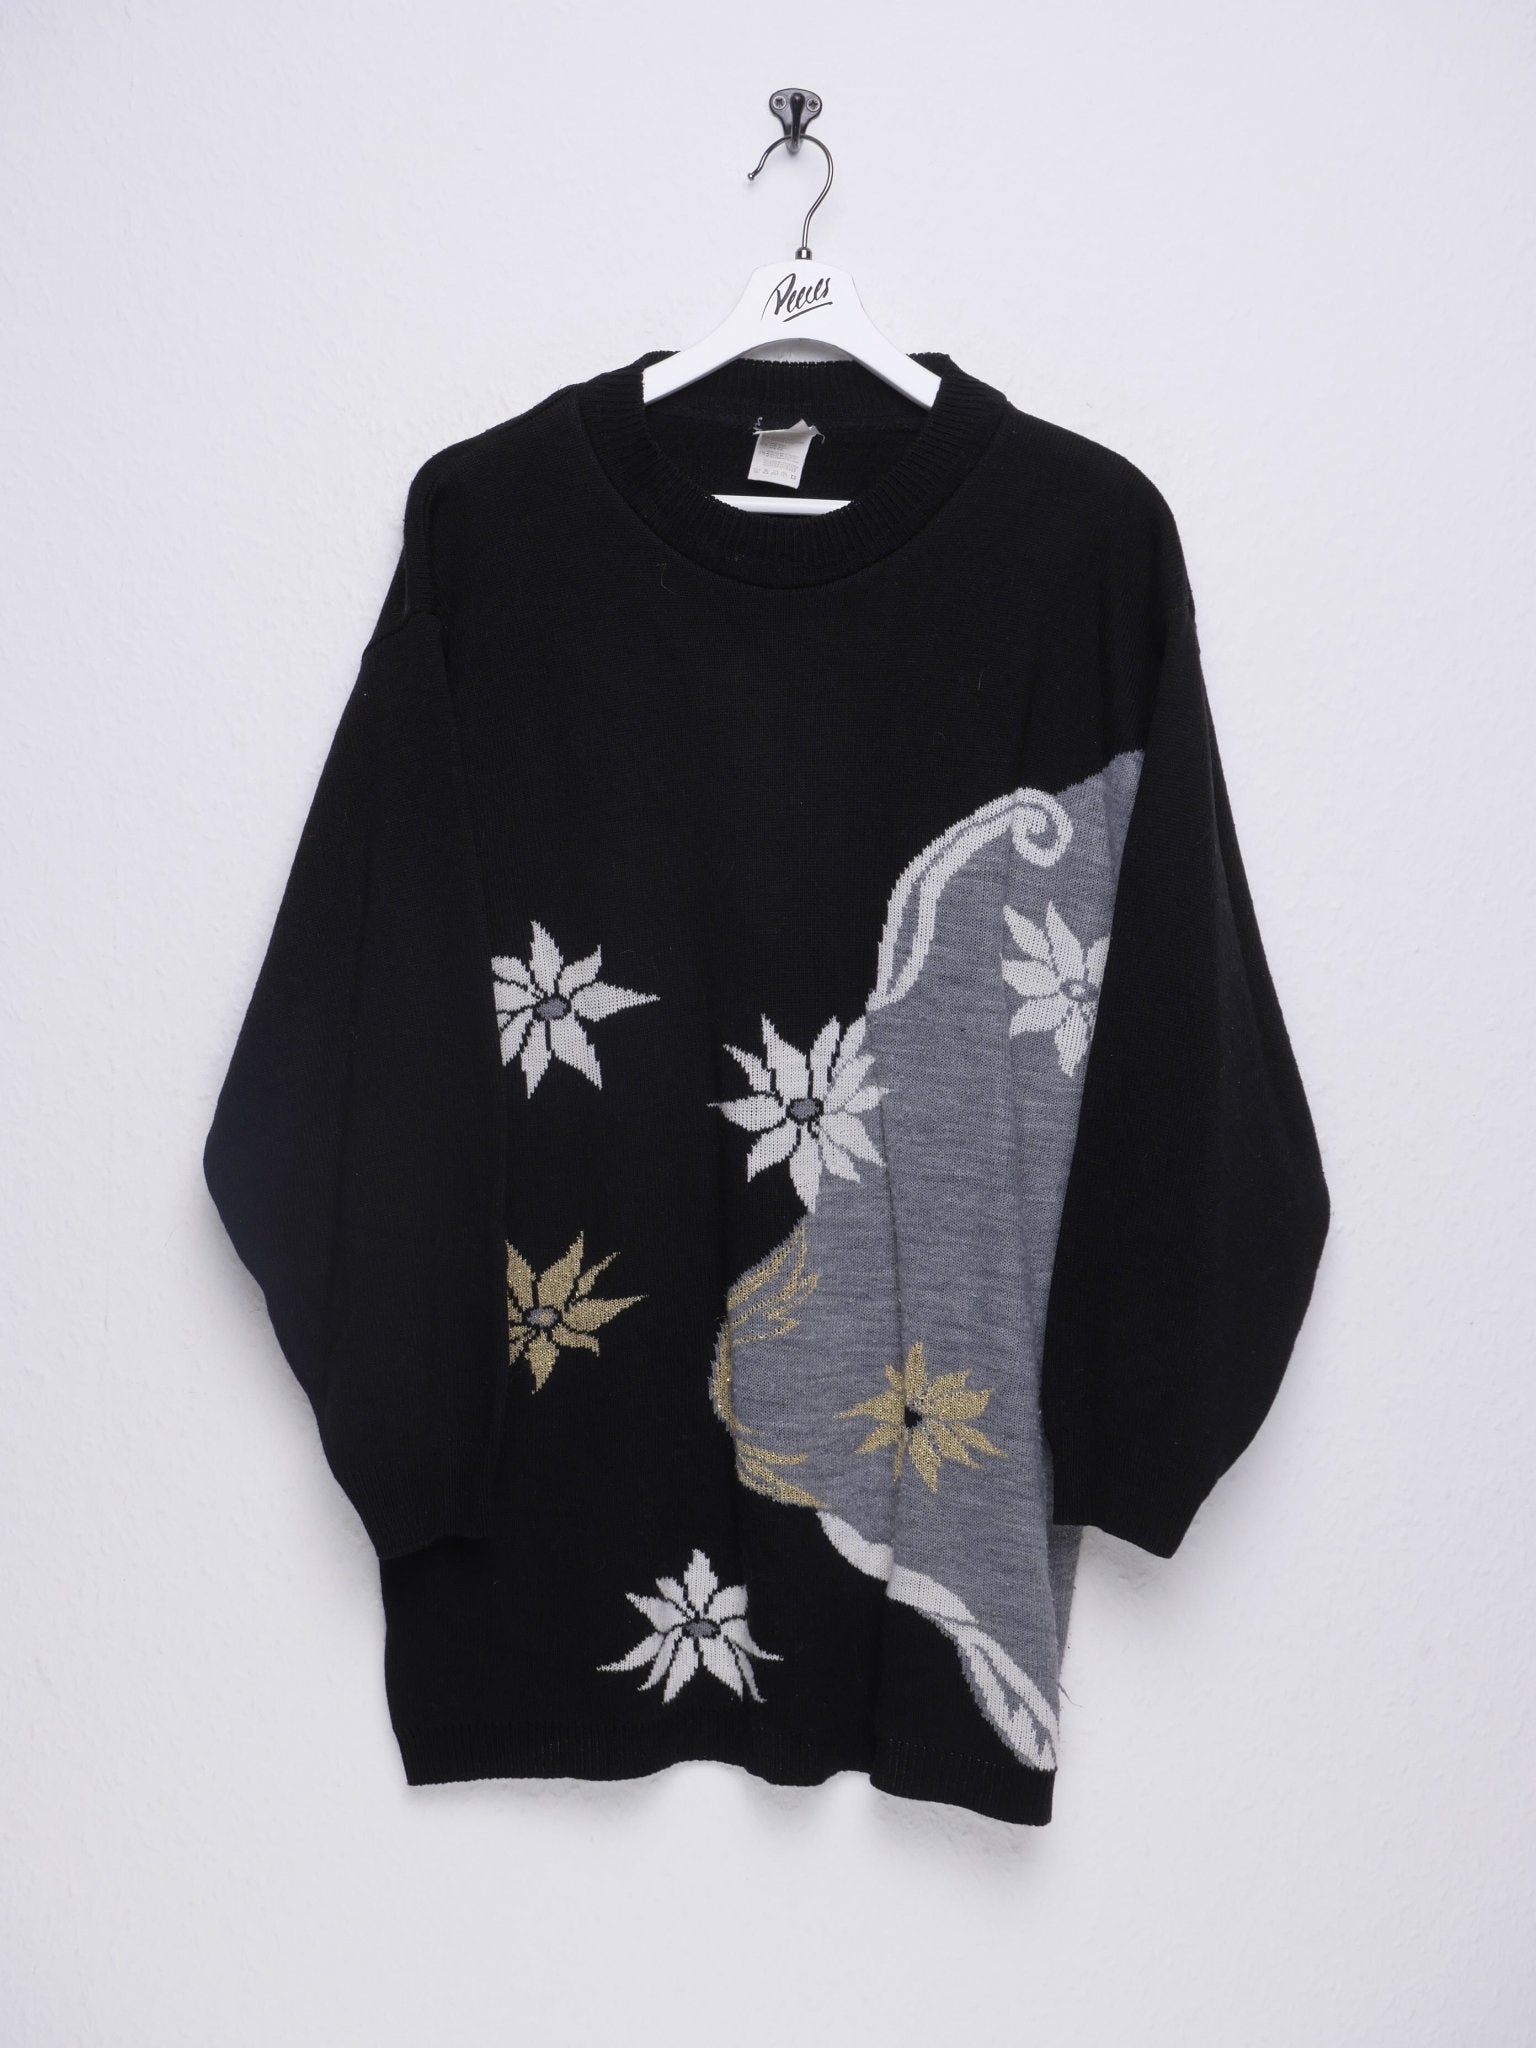 knitted patterned black Vintage Sweater - Peeces